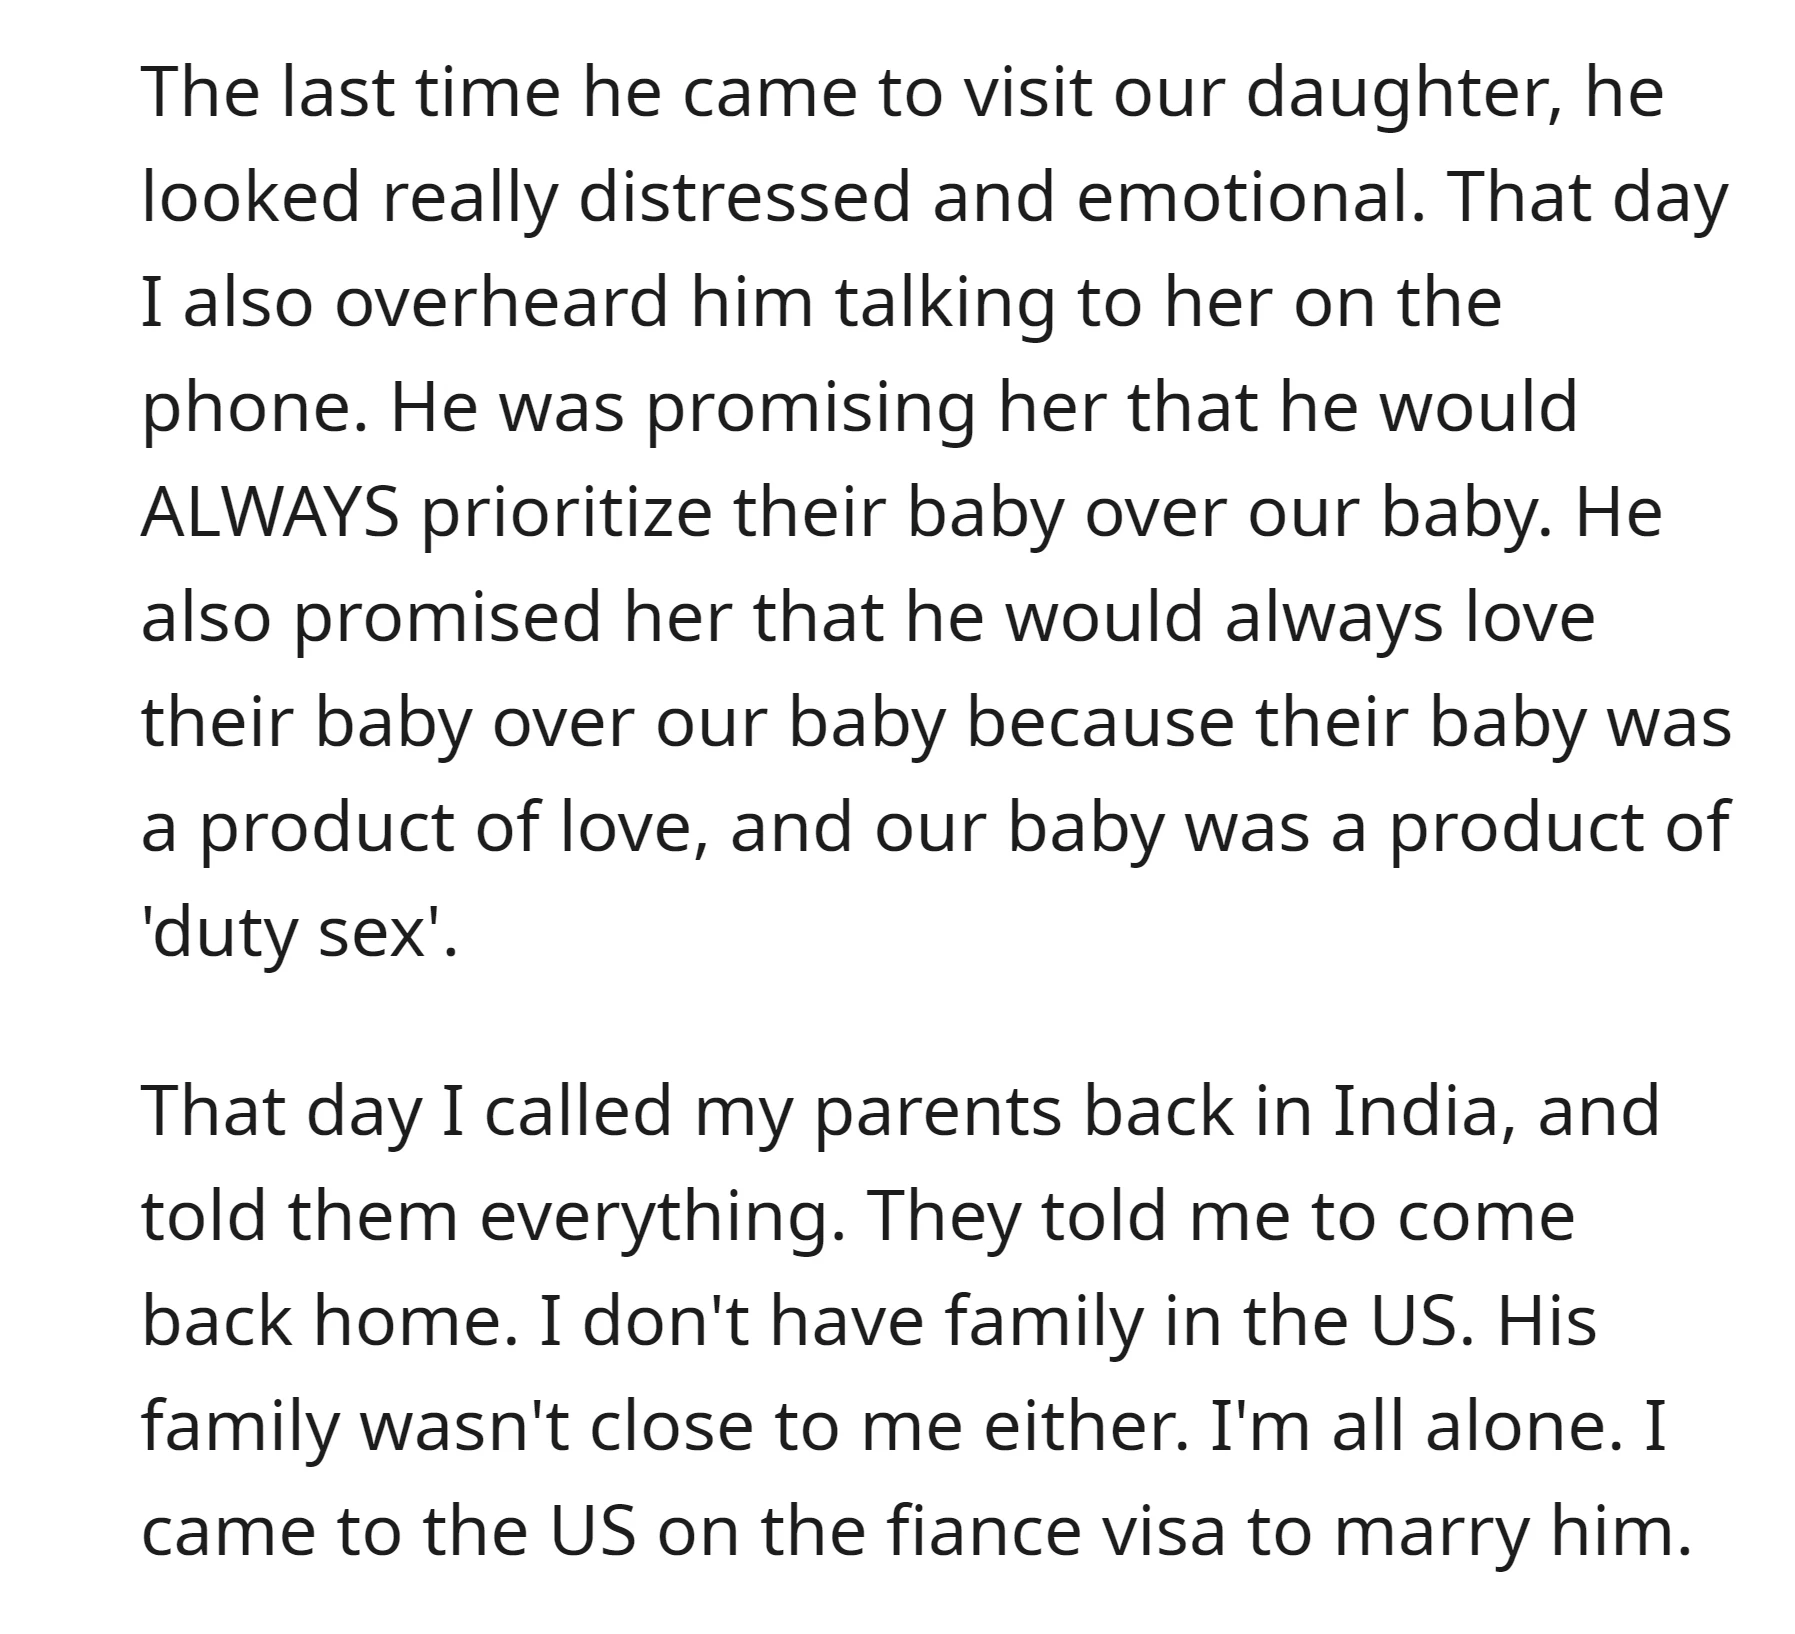 OP's parents in India advised her to return home